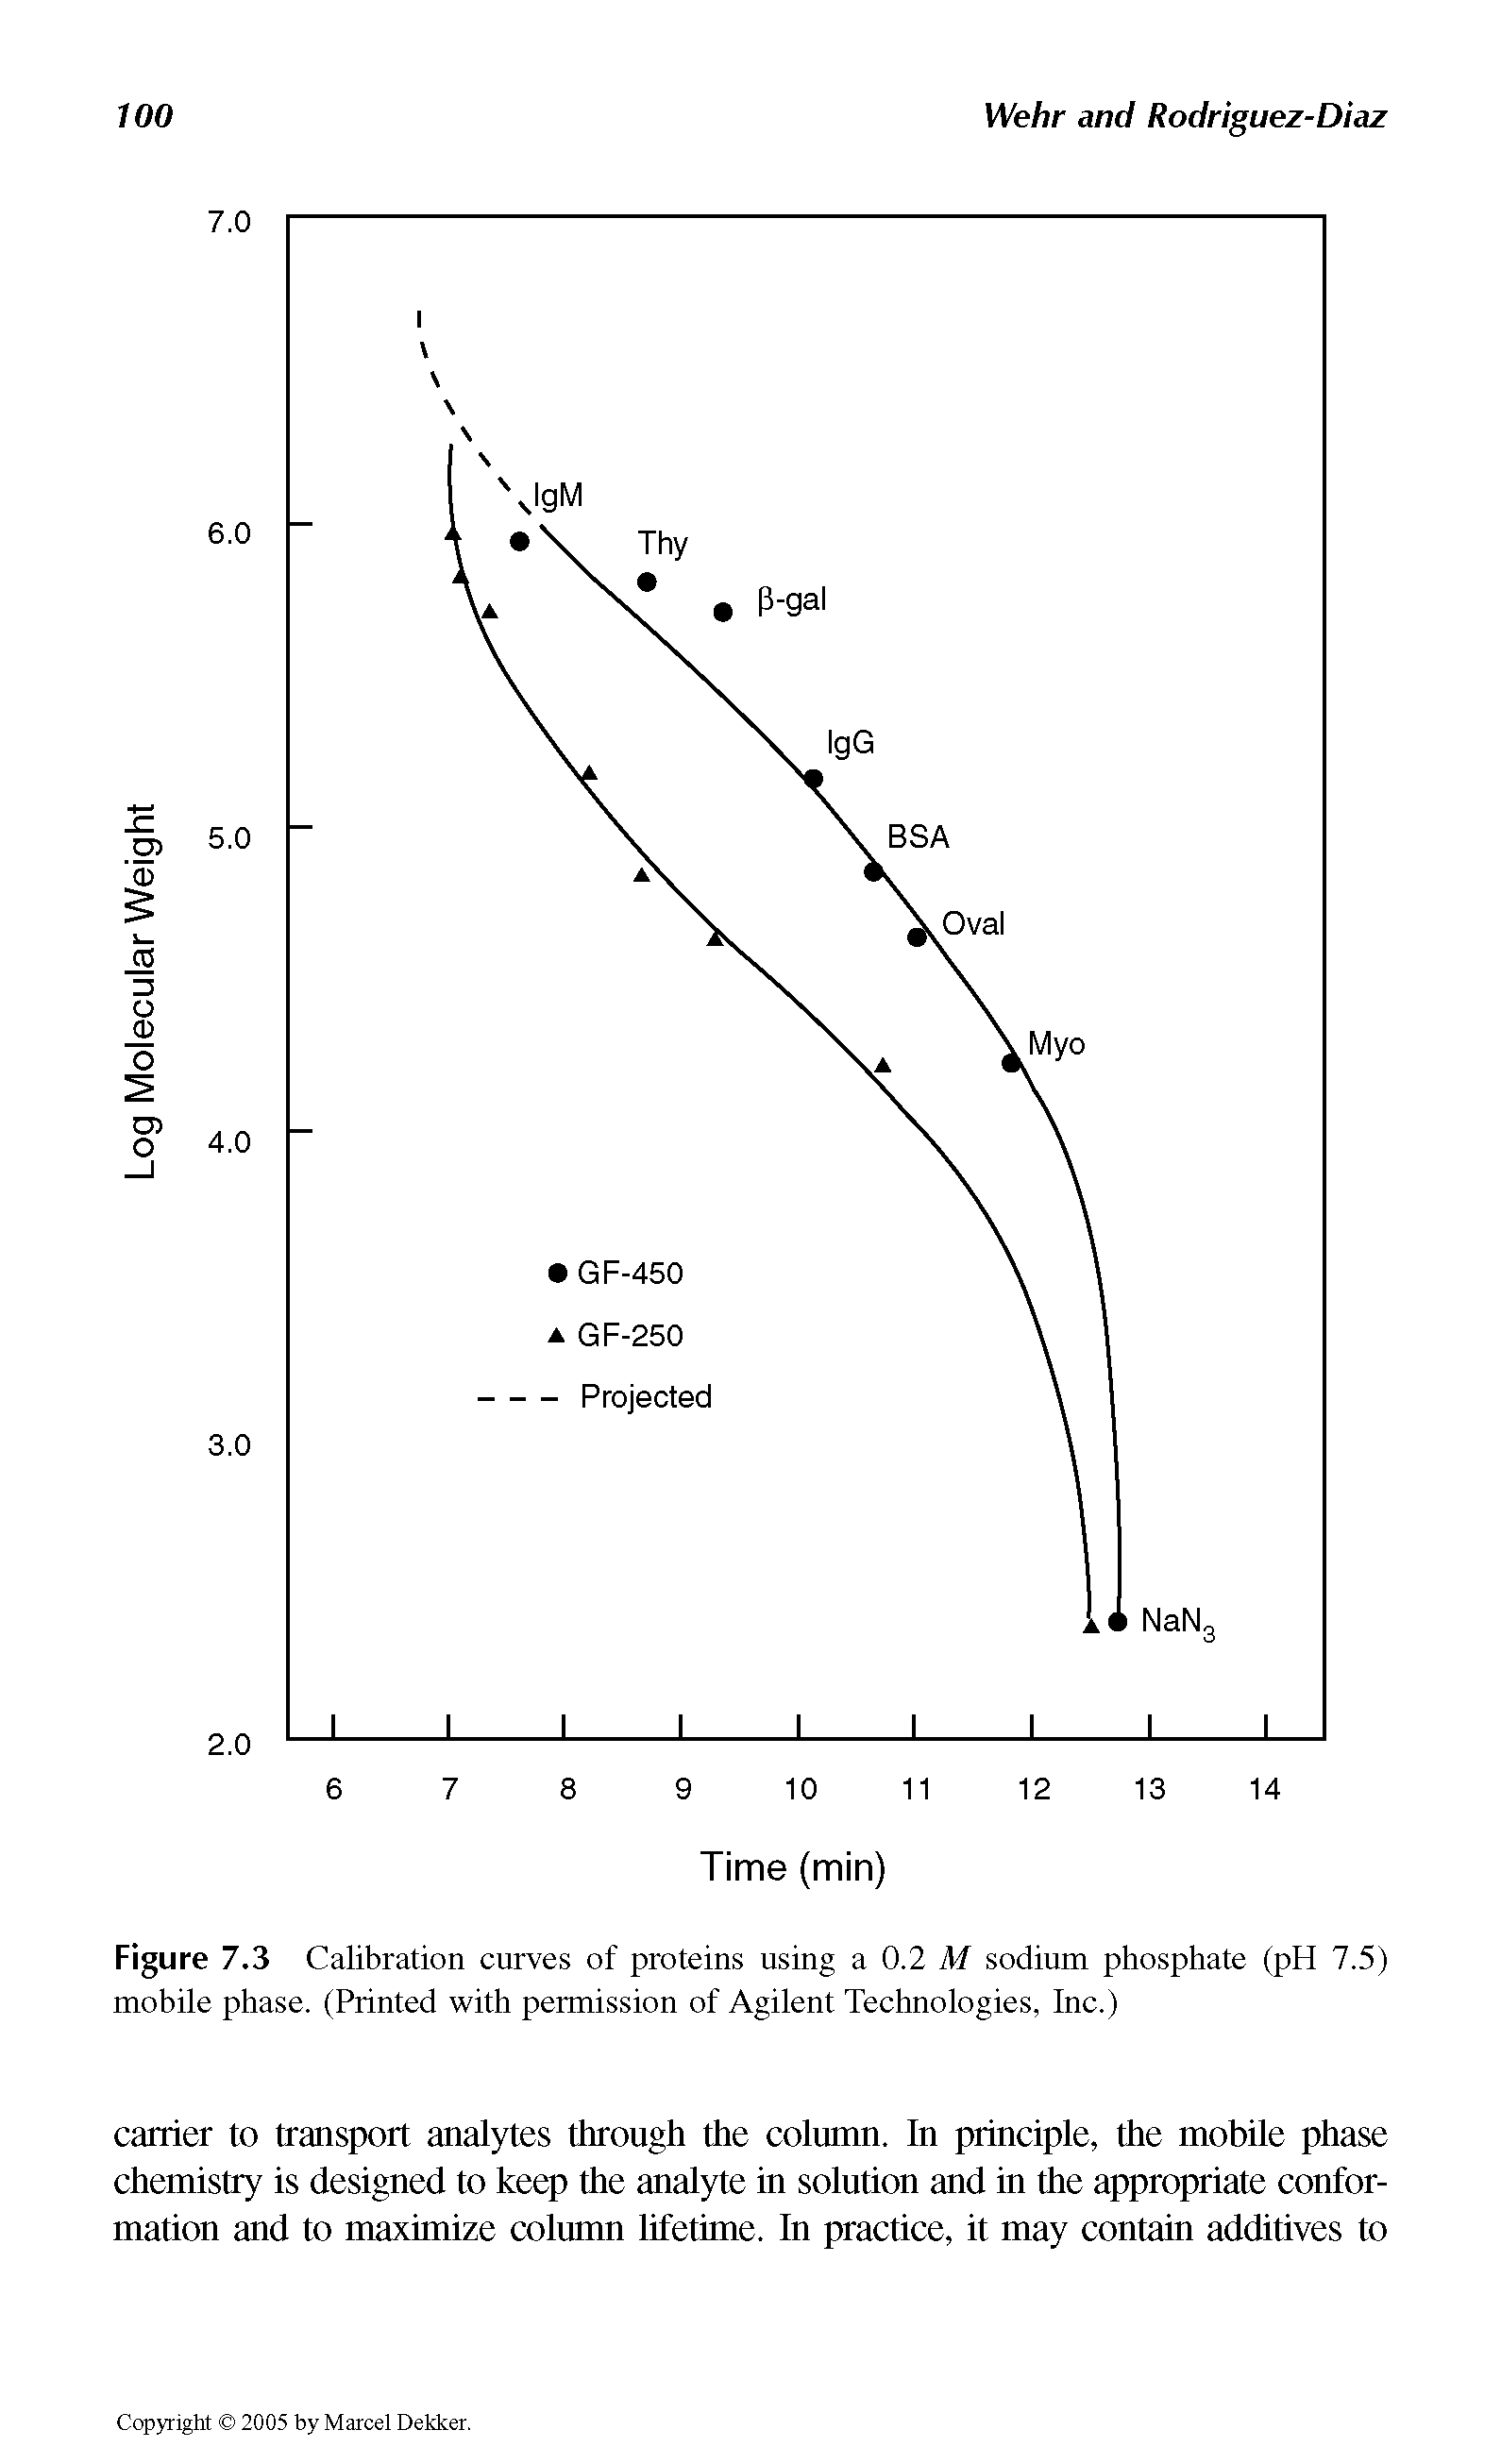 Figure 7.3 Calibration curves of proteins using a 0.2 M sodium phosphate (pH 7.5) mobile phase. (Printed with permission of Agilent Technologies, Inc.)...